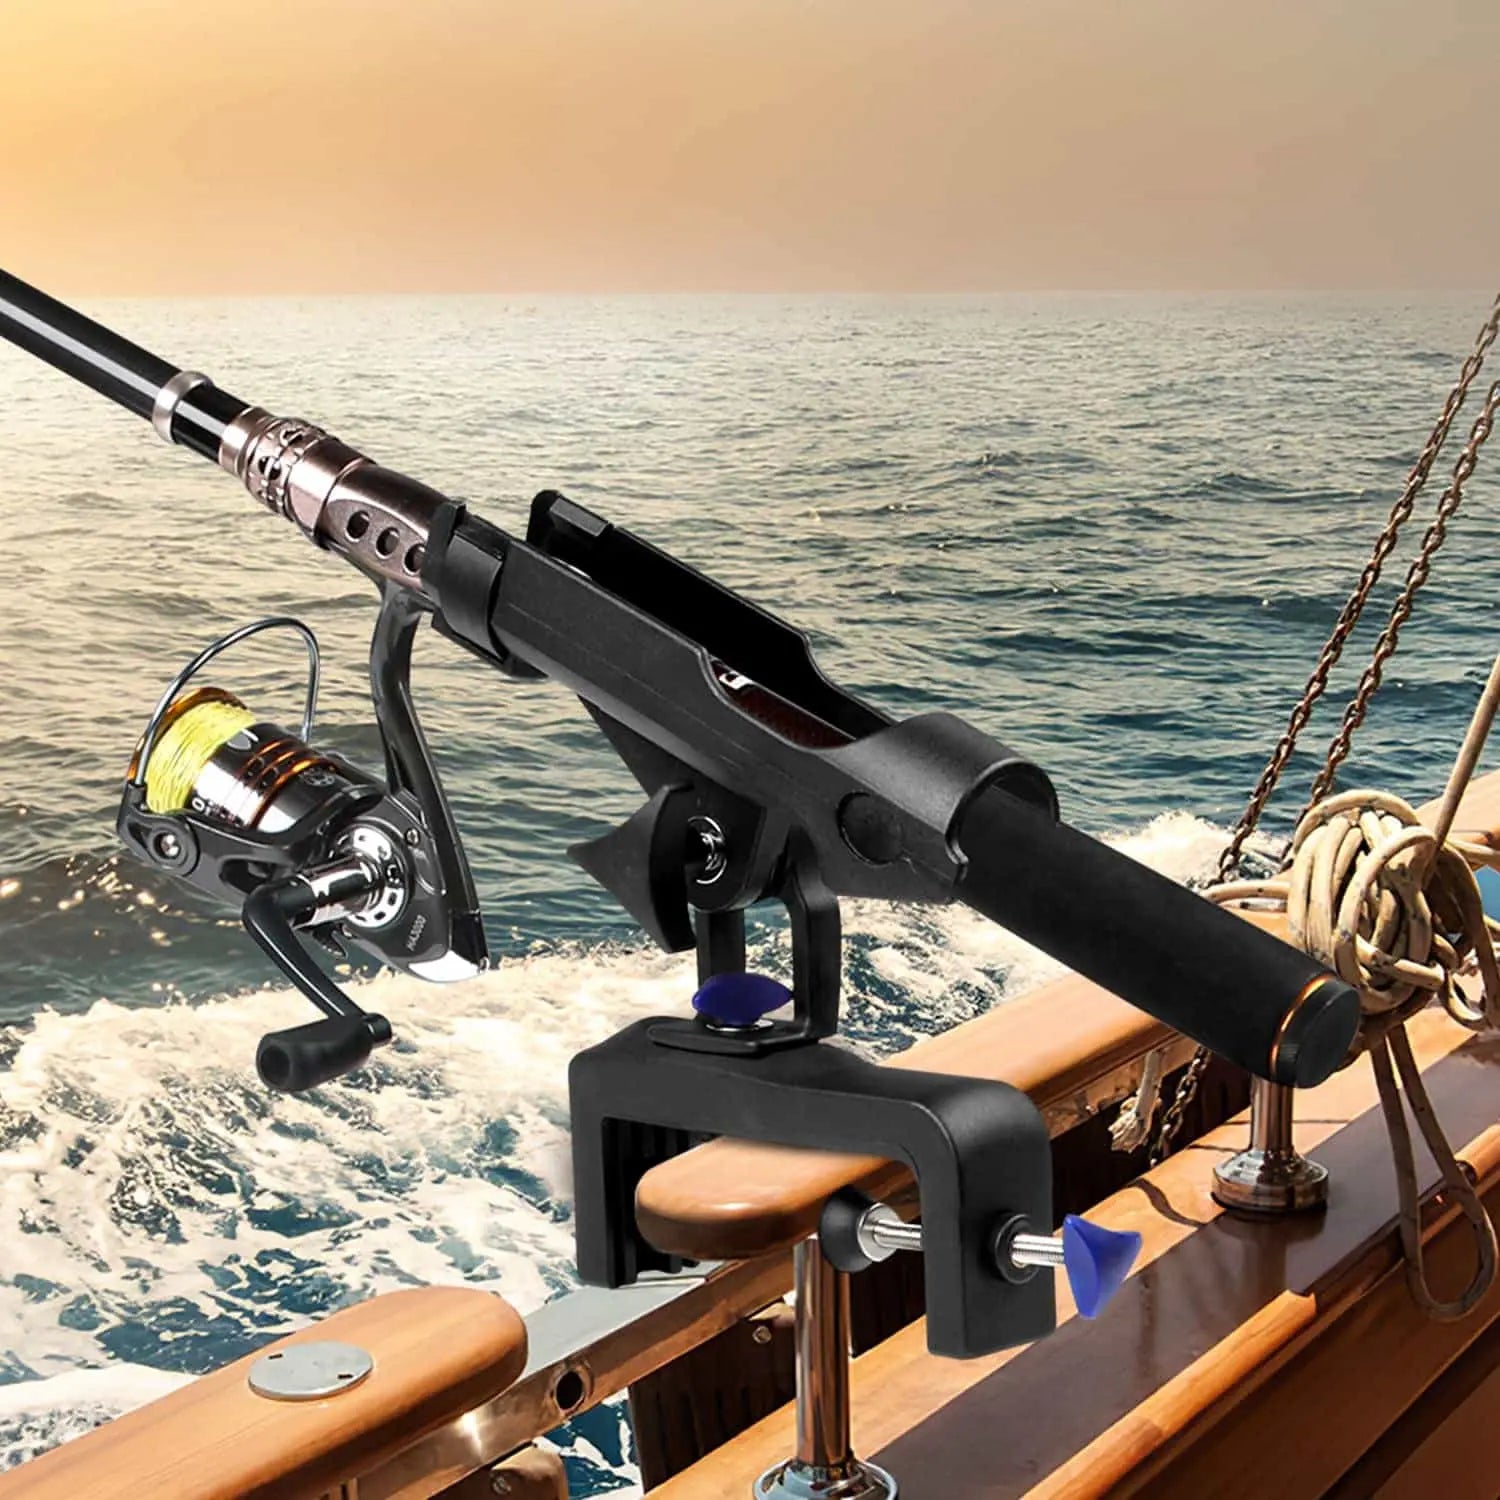 Top 5 Rod Holders Every Angler Needs in Their Tackle Box